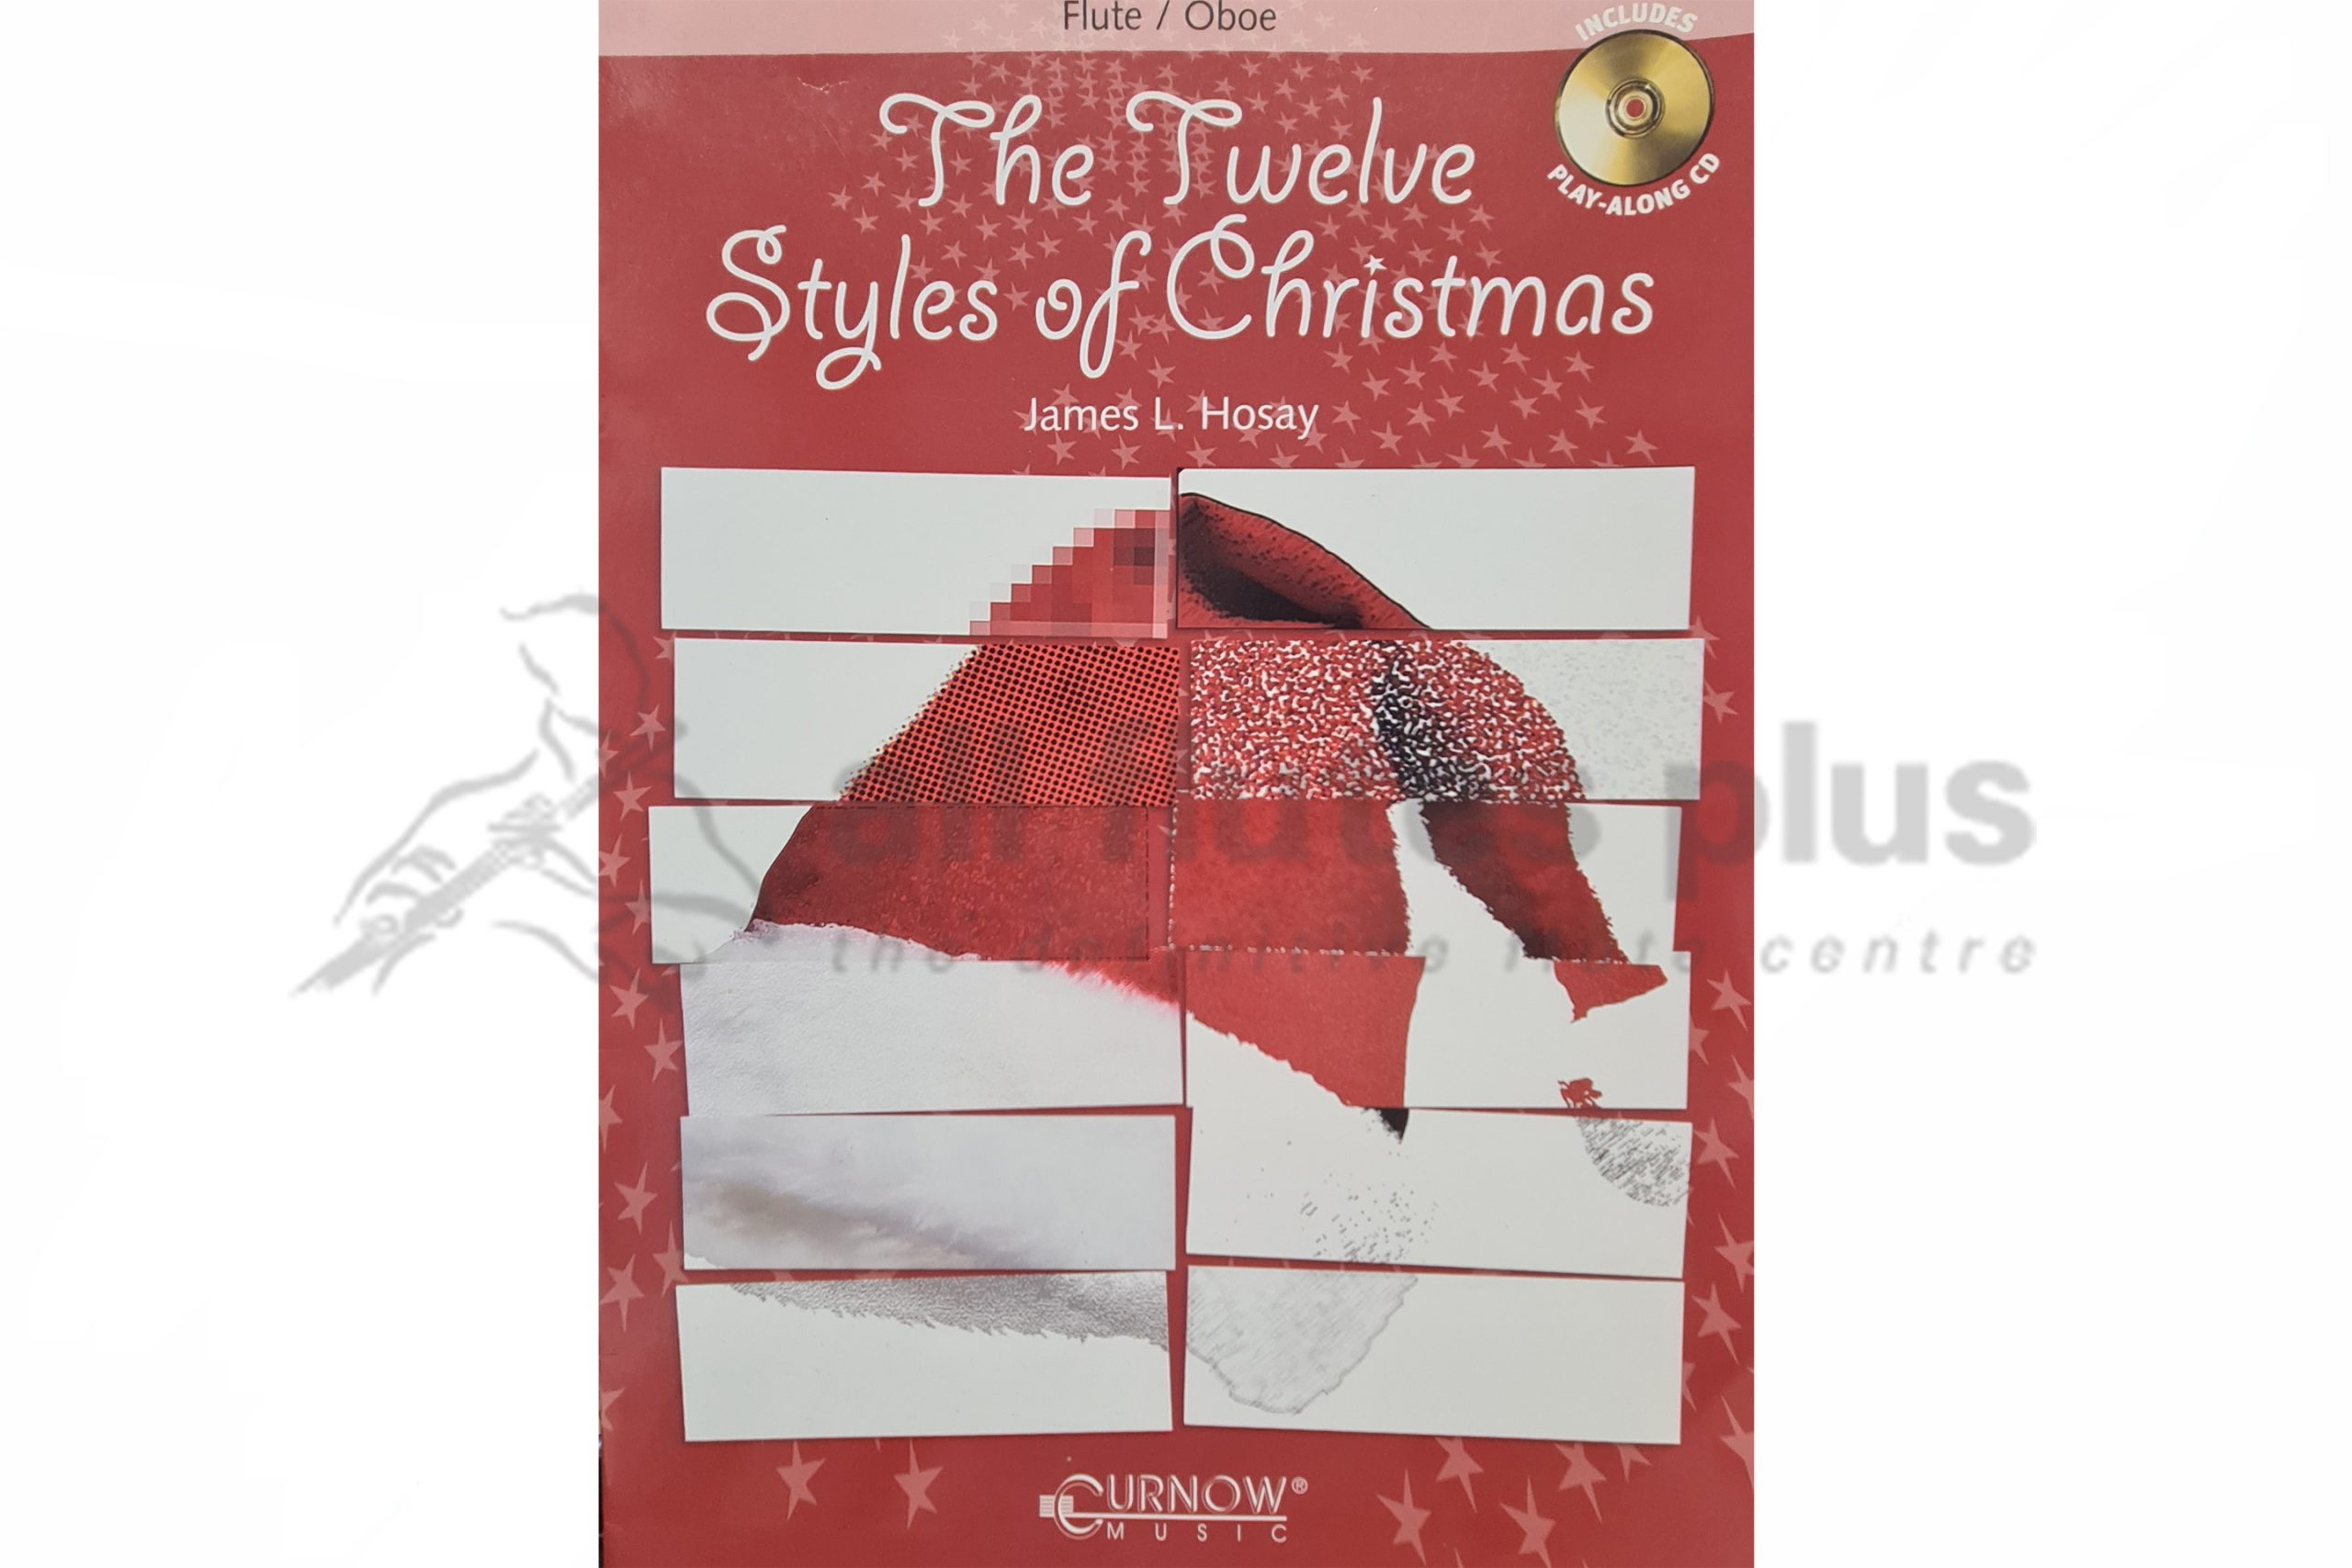 The Twelve Styles of Christmas for Flute/Oboe